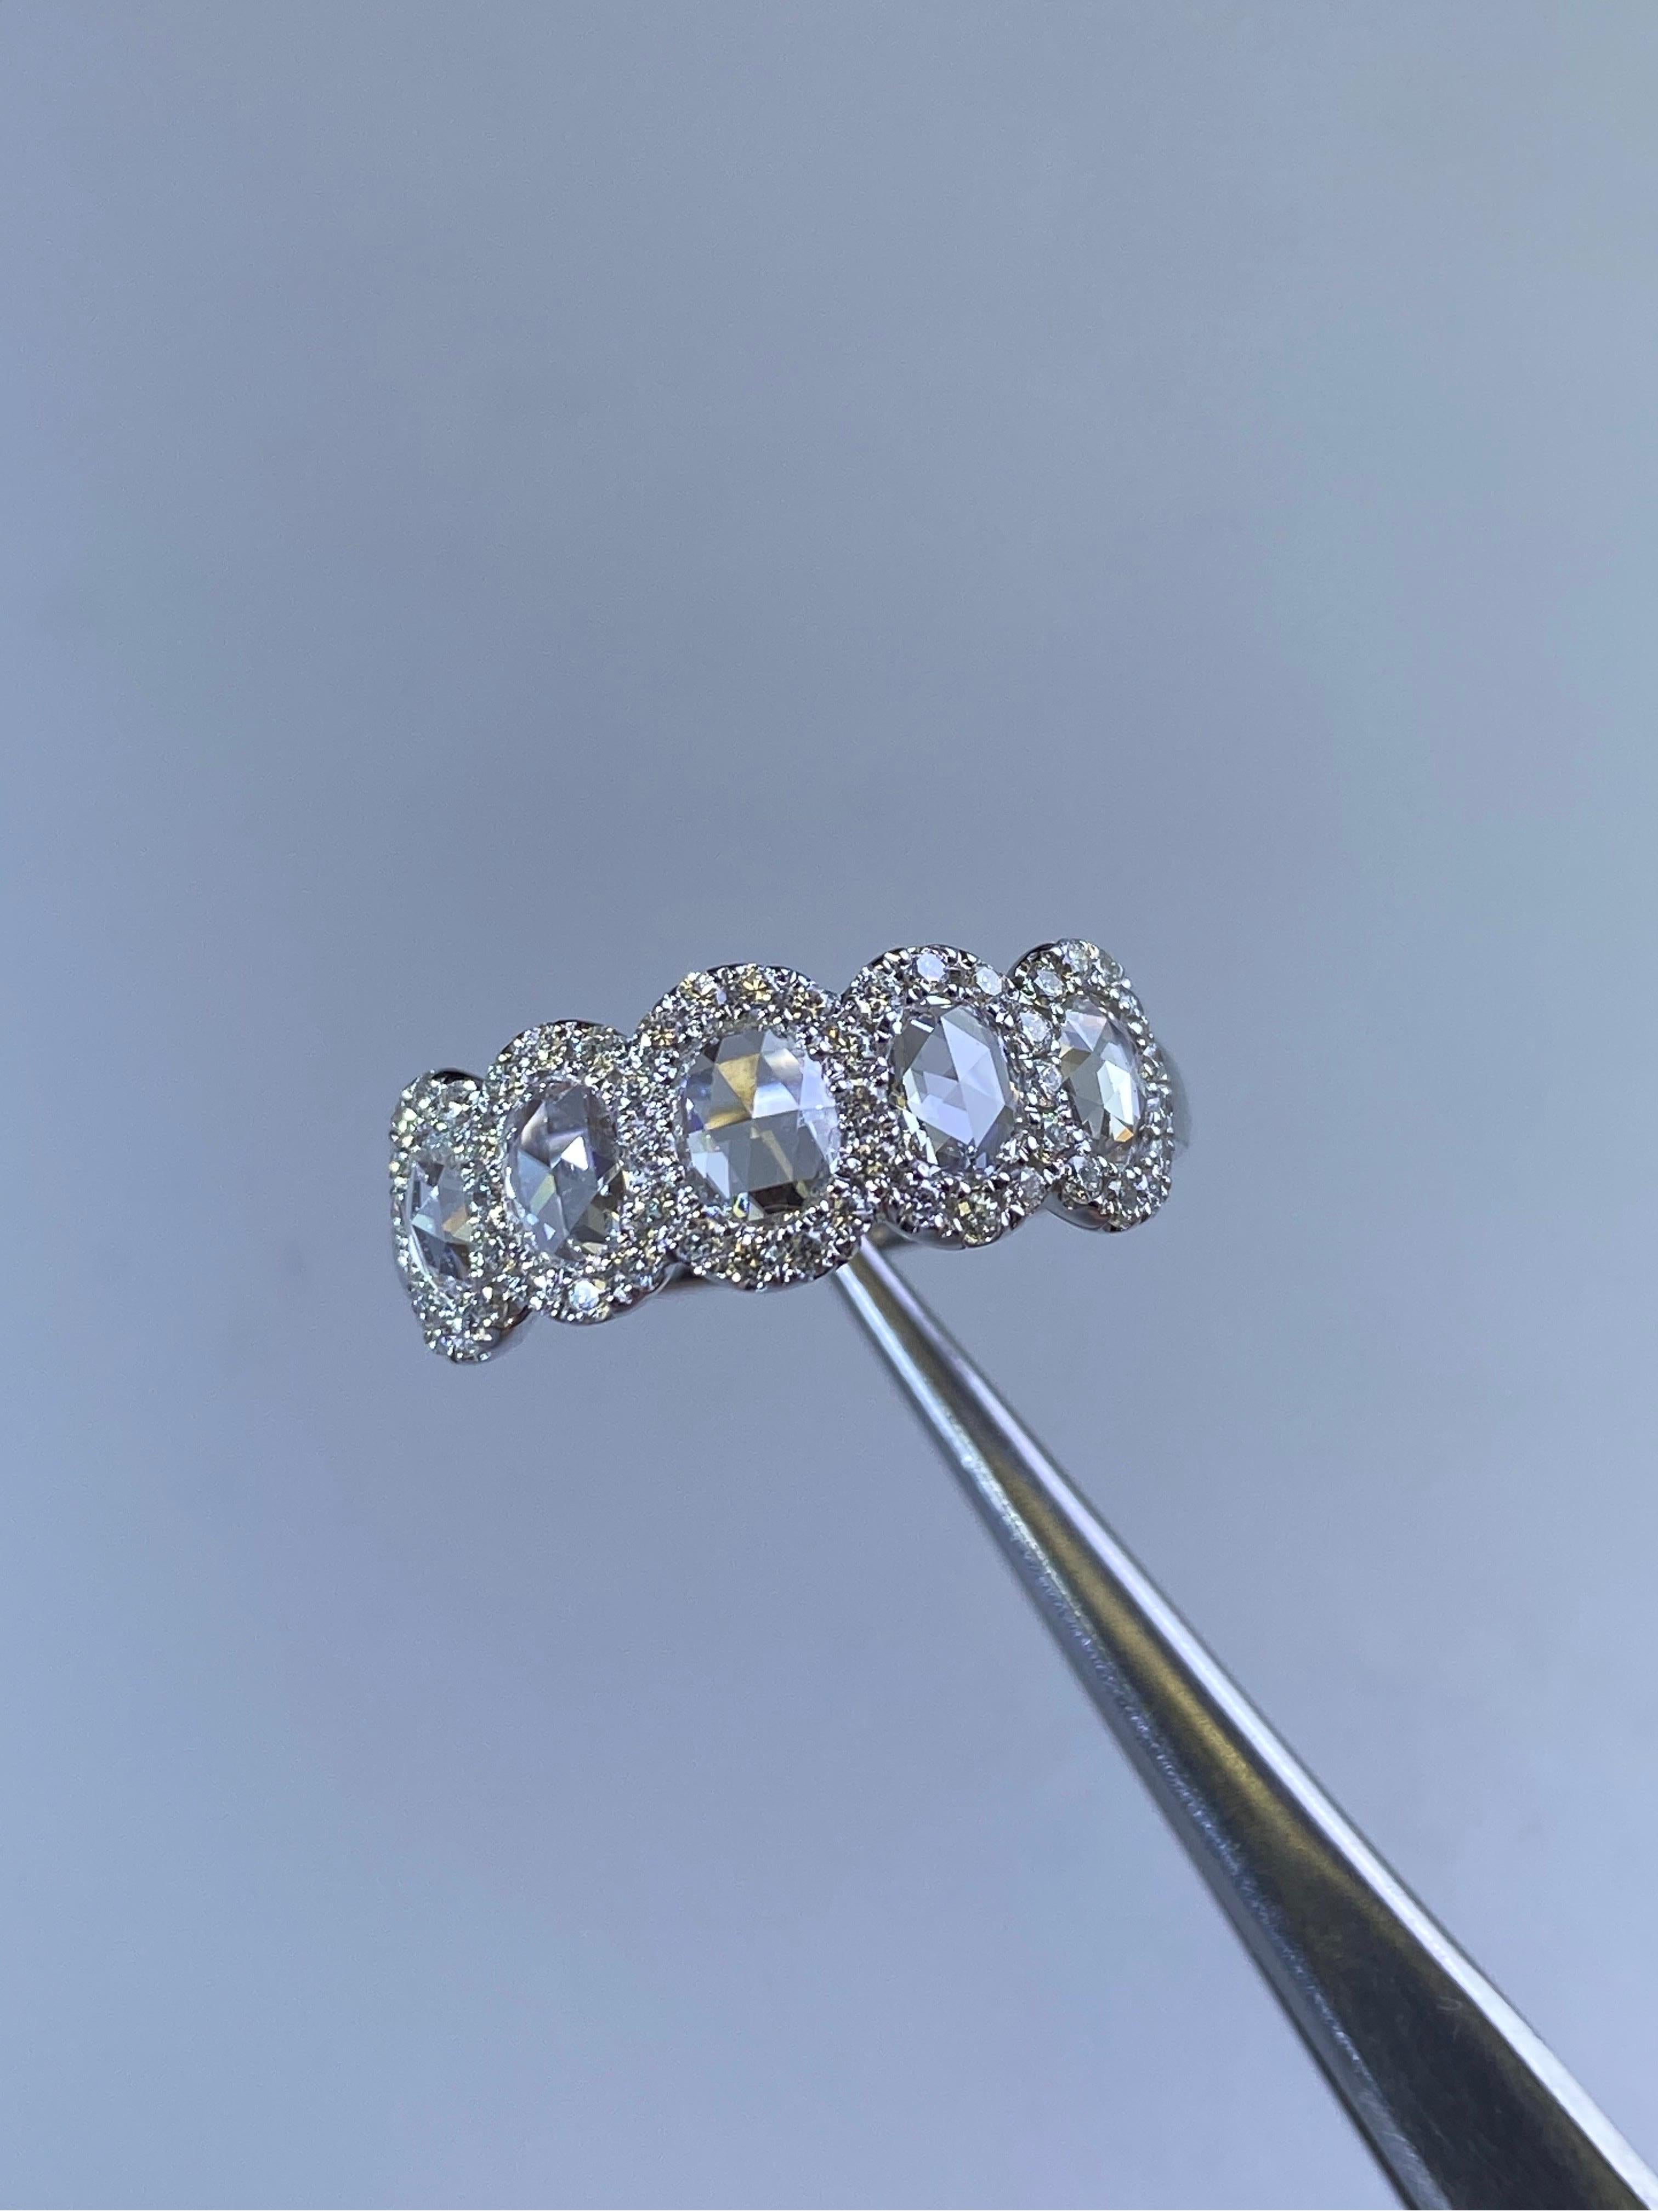 what is used to cut diamond